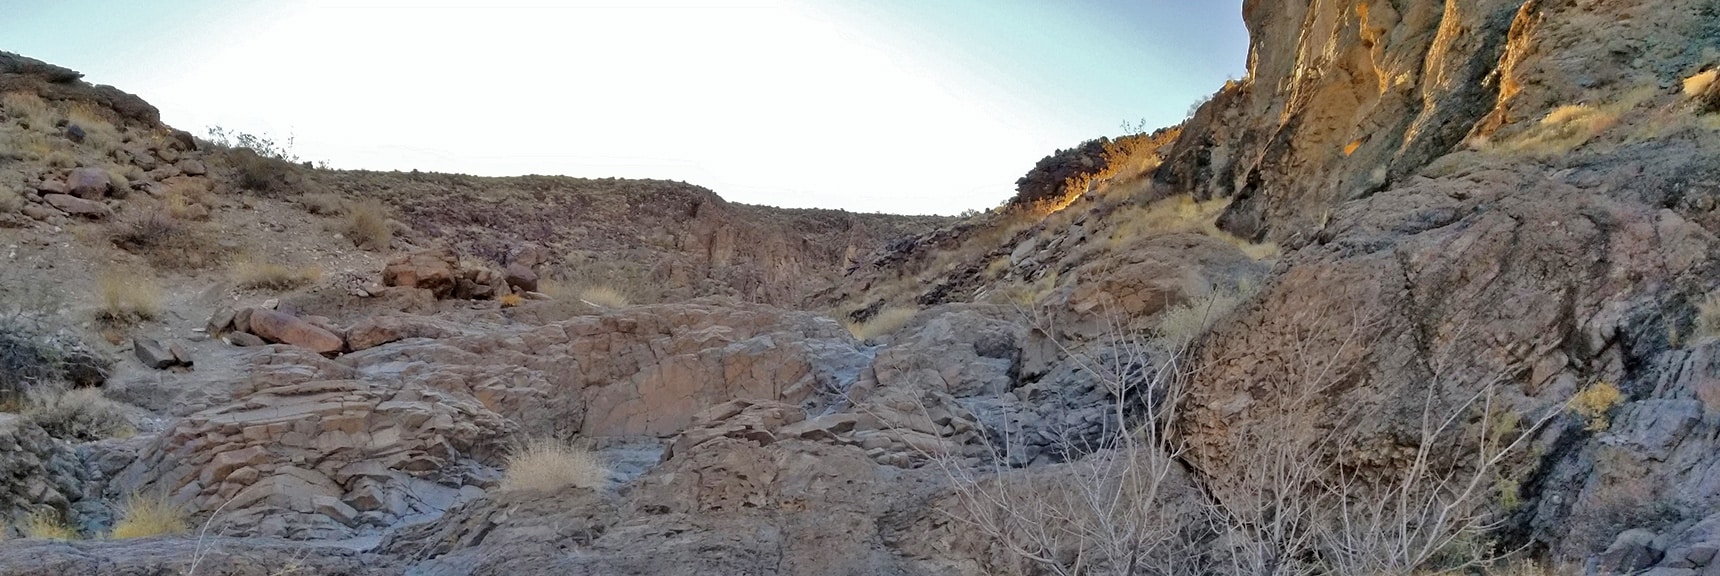 Ascending a Small Dry Waterfall | Petroglyph Canyon | Sloan Canyon National Conservation Area, Nevada